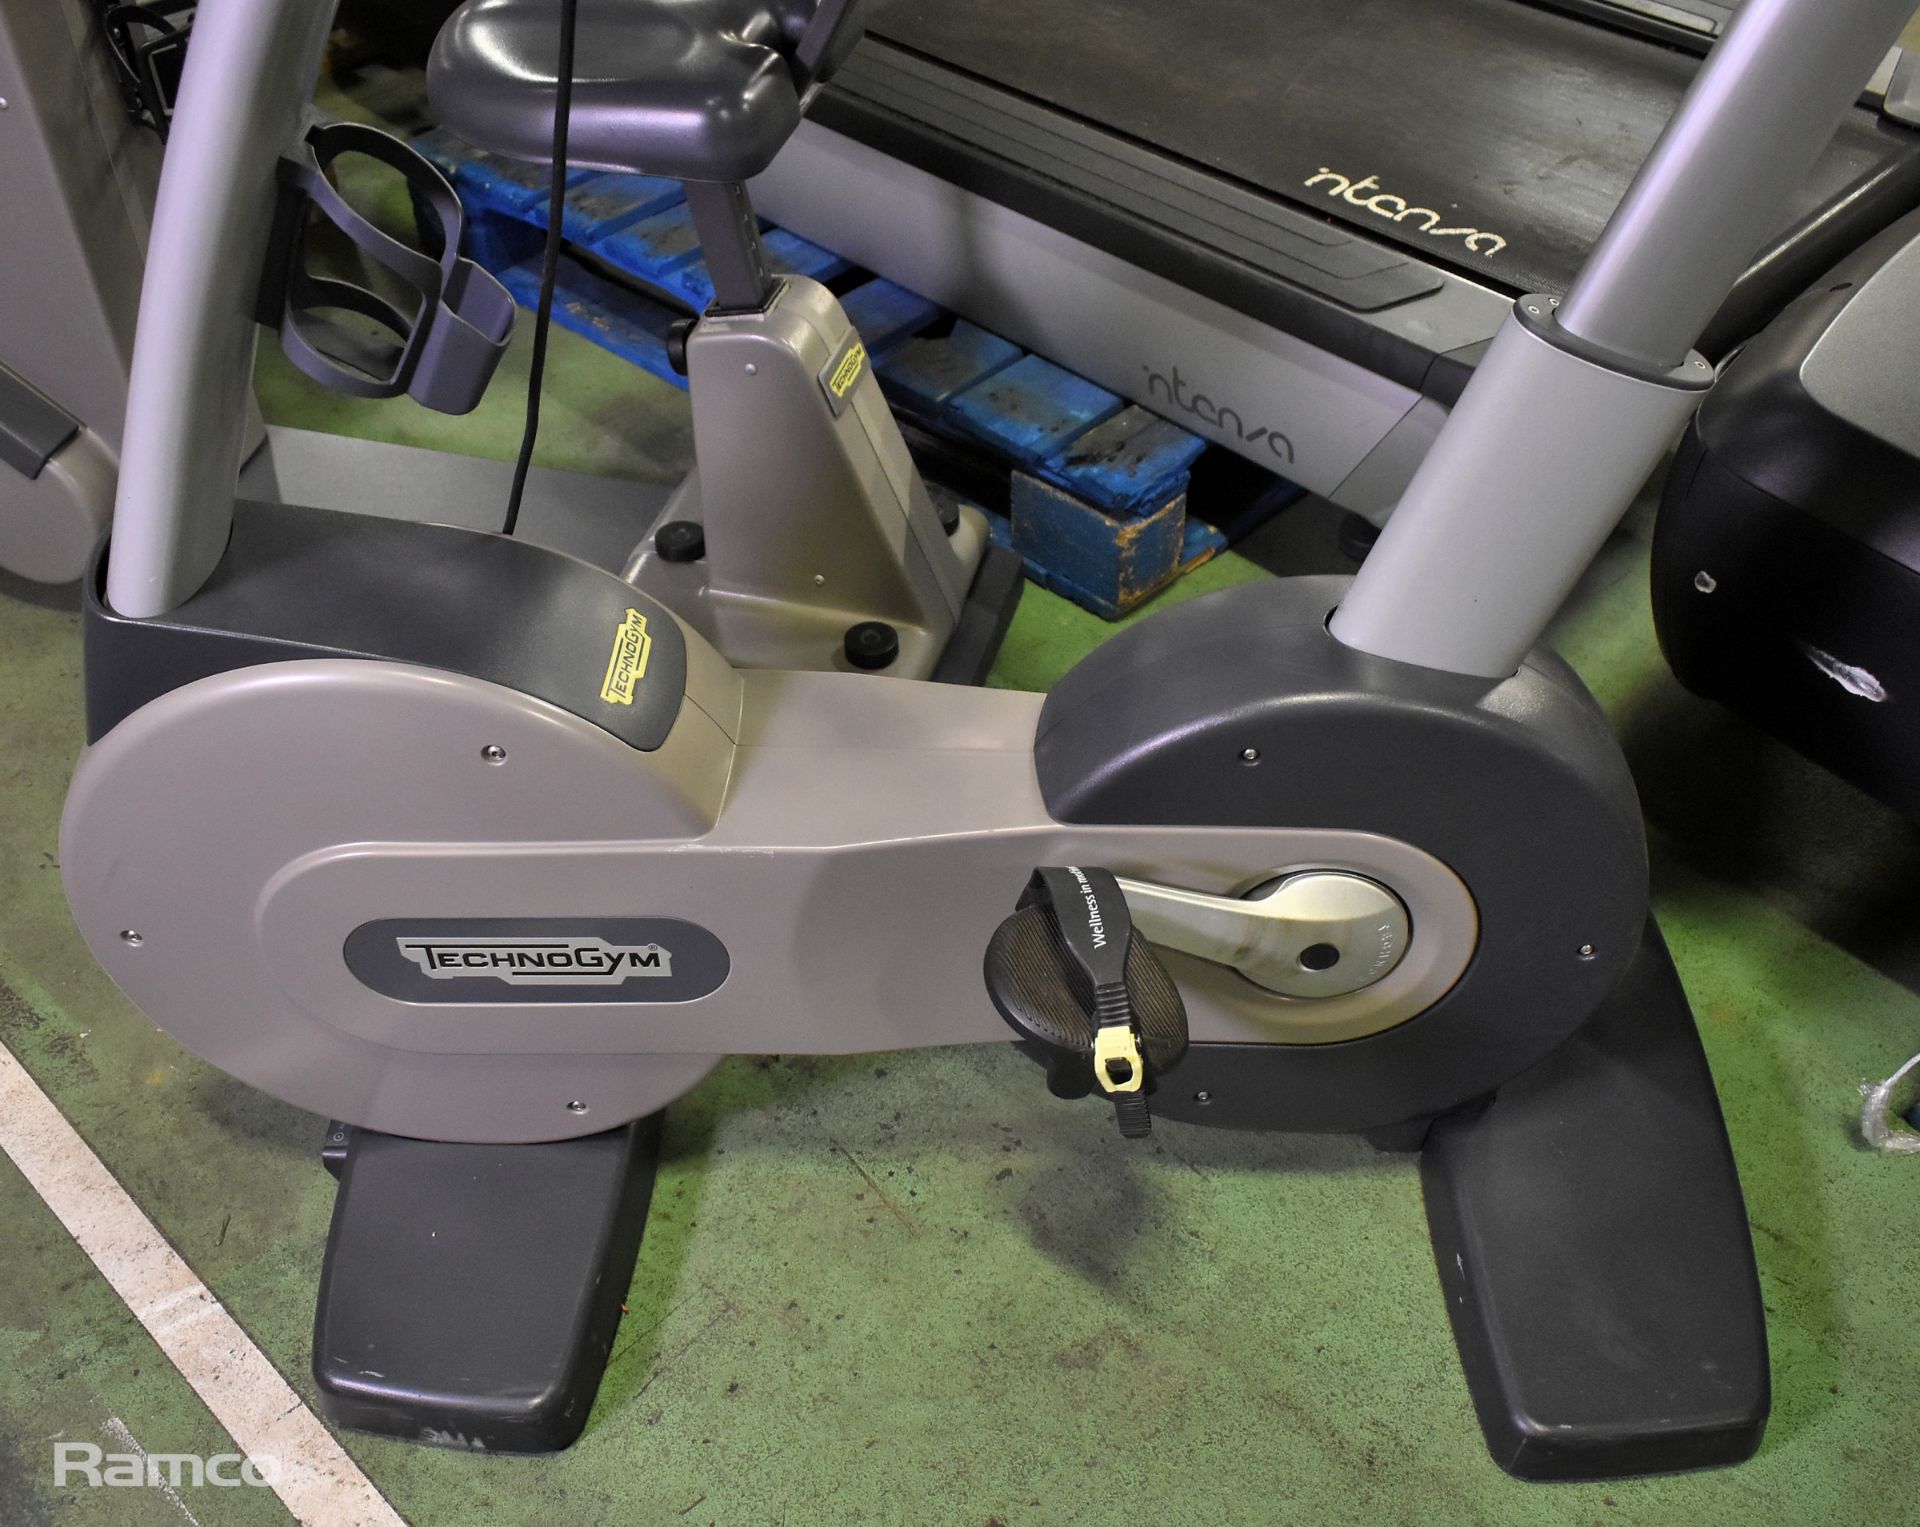 TechnoGym static exercise bike - W 550 x D 1210 x H 1380mm - Image 2 of 7